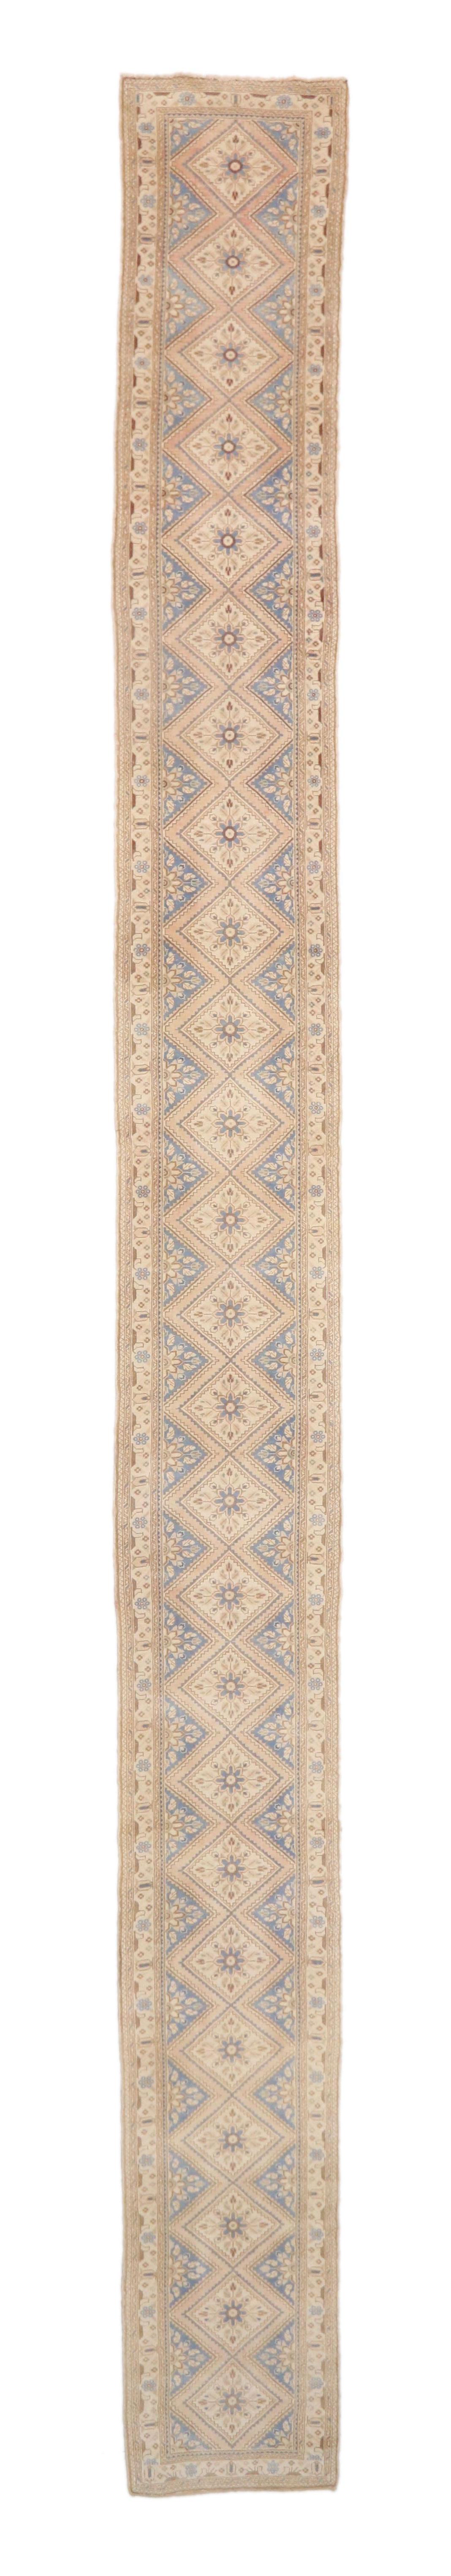 76902 Antique Persian Malayer Runner with French Provincial Style, Extra-Long Hallway Runner 02'05 x 25'07. With a well-balanced design and an impressive length combined with harmonious and subtle hues, this hand knotted wool antique Persian Malayer